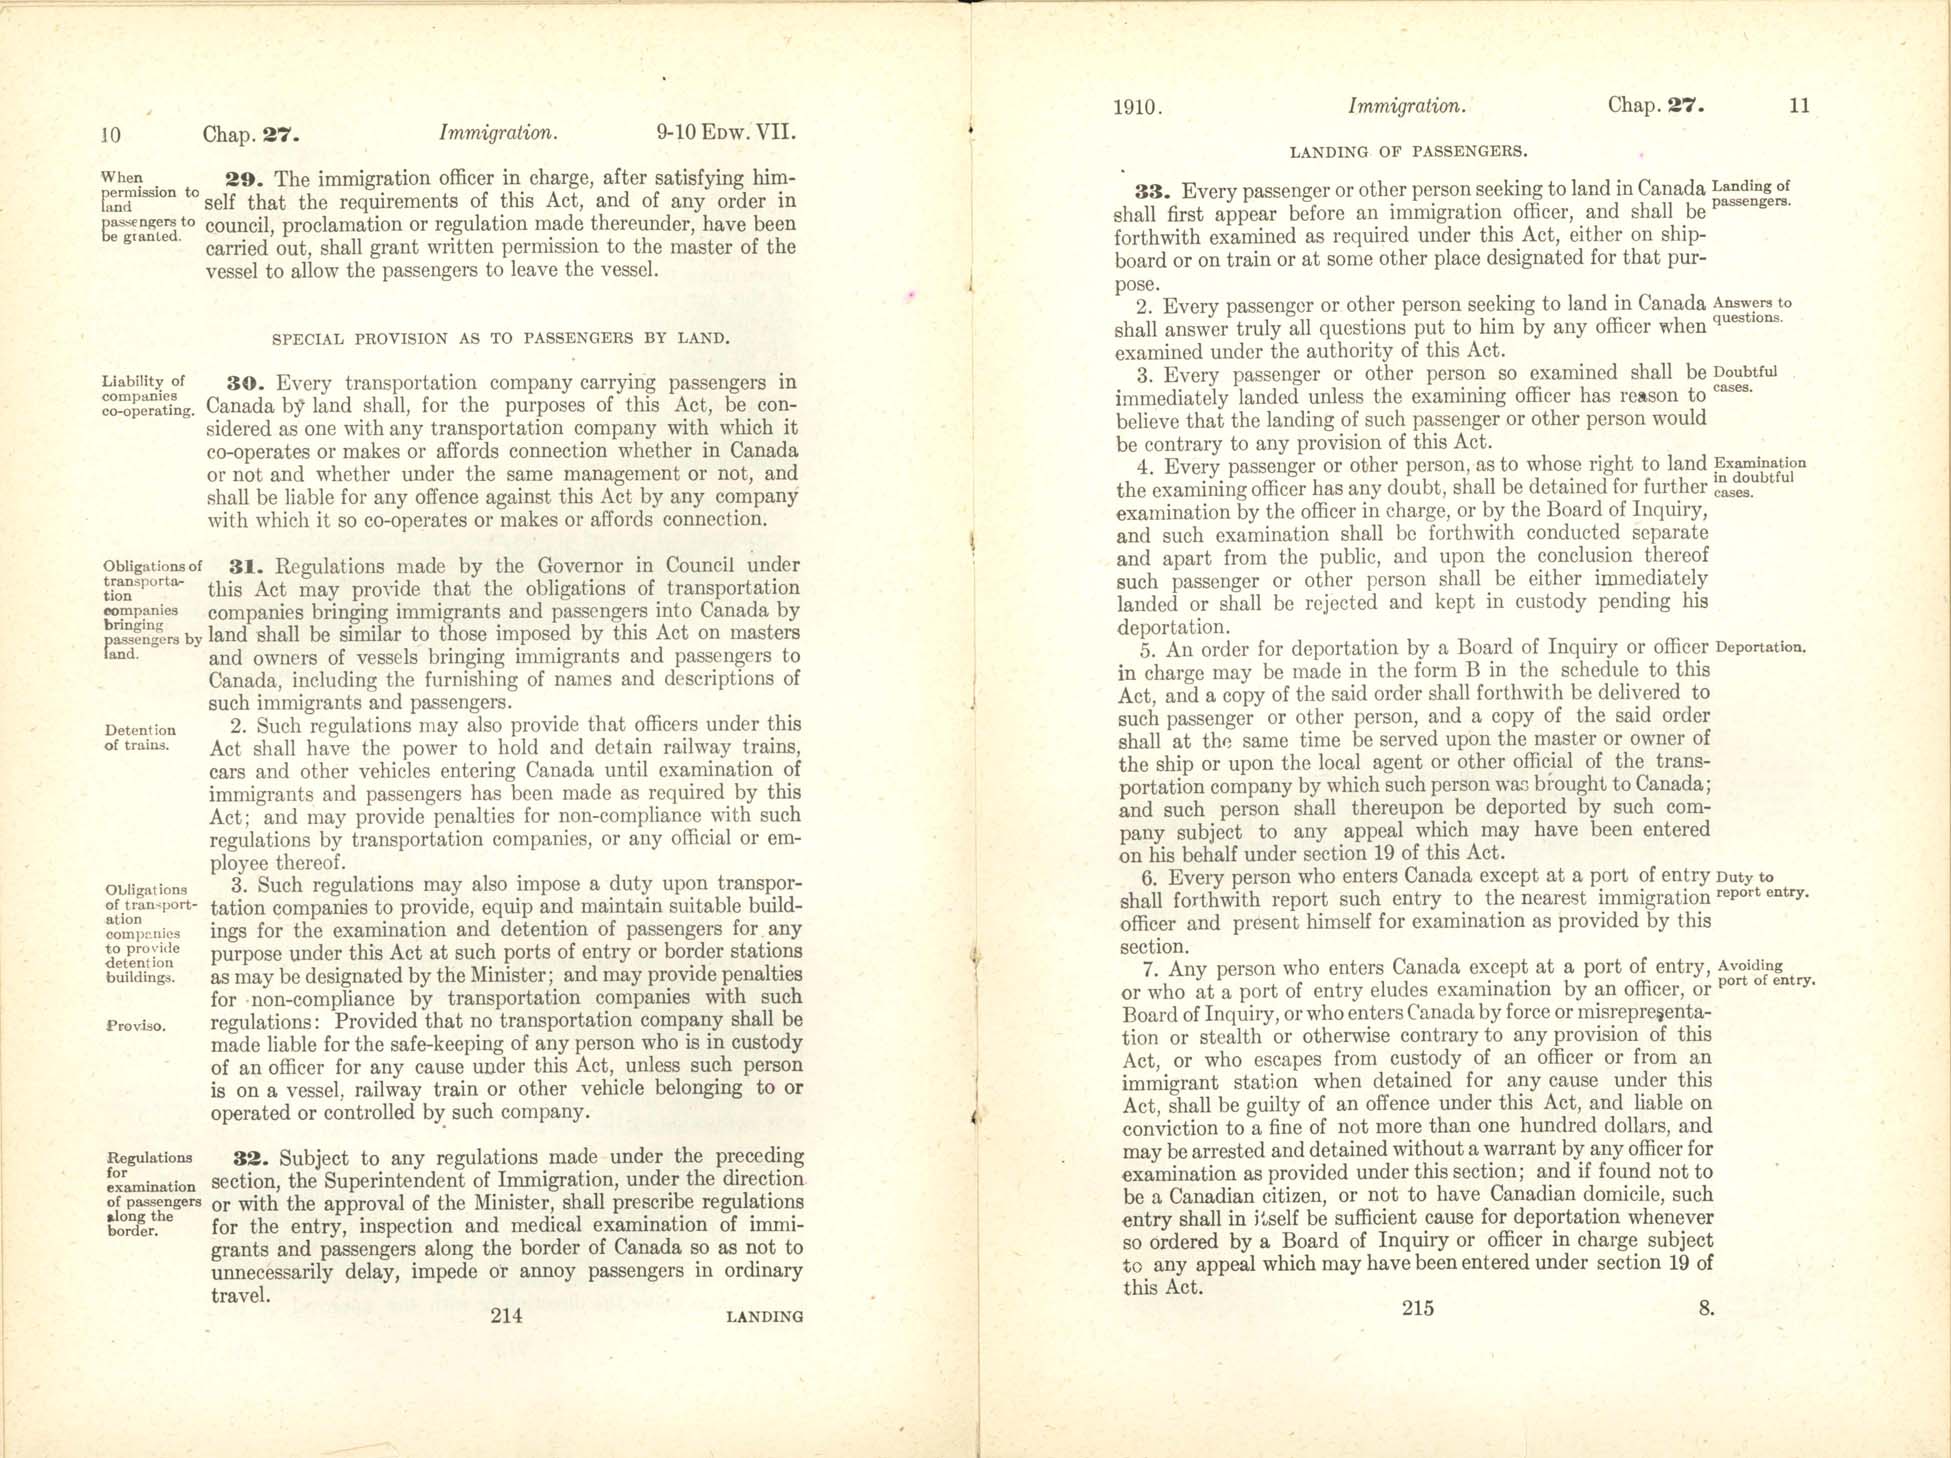 Chap. 27 Page 214, 215 Immigration Act, 1910